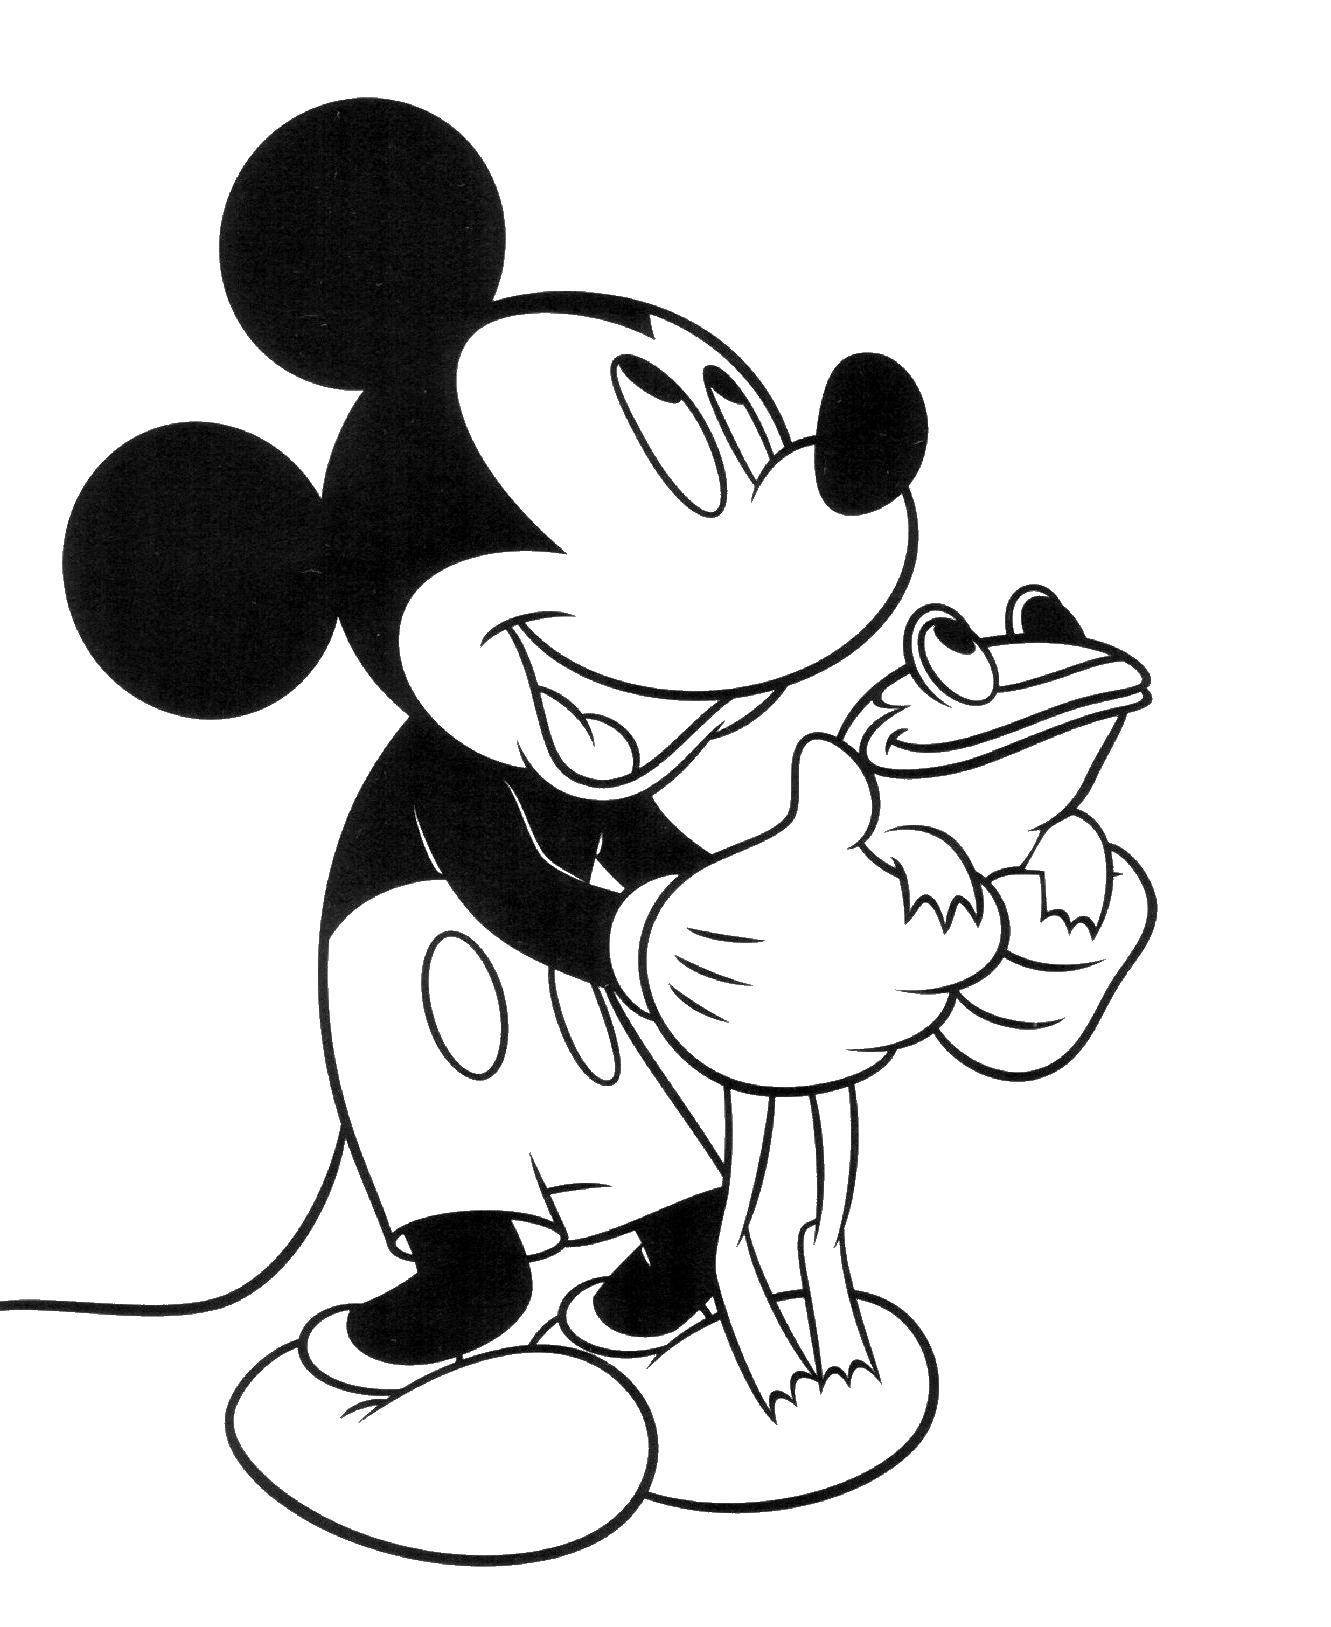 Coloring Mickey mouse and the frog. Category Mickey mouse. Tags:  Disney, Mickey Mouse.